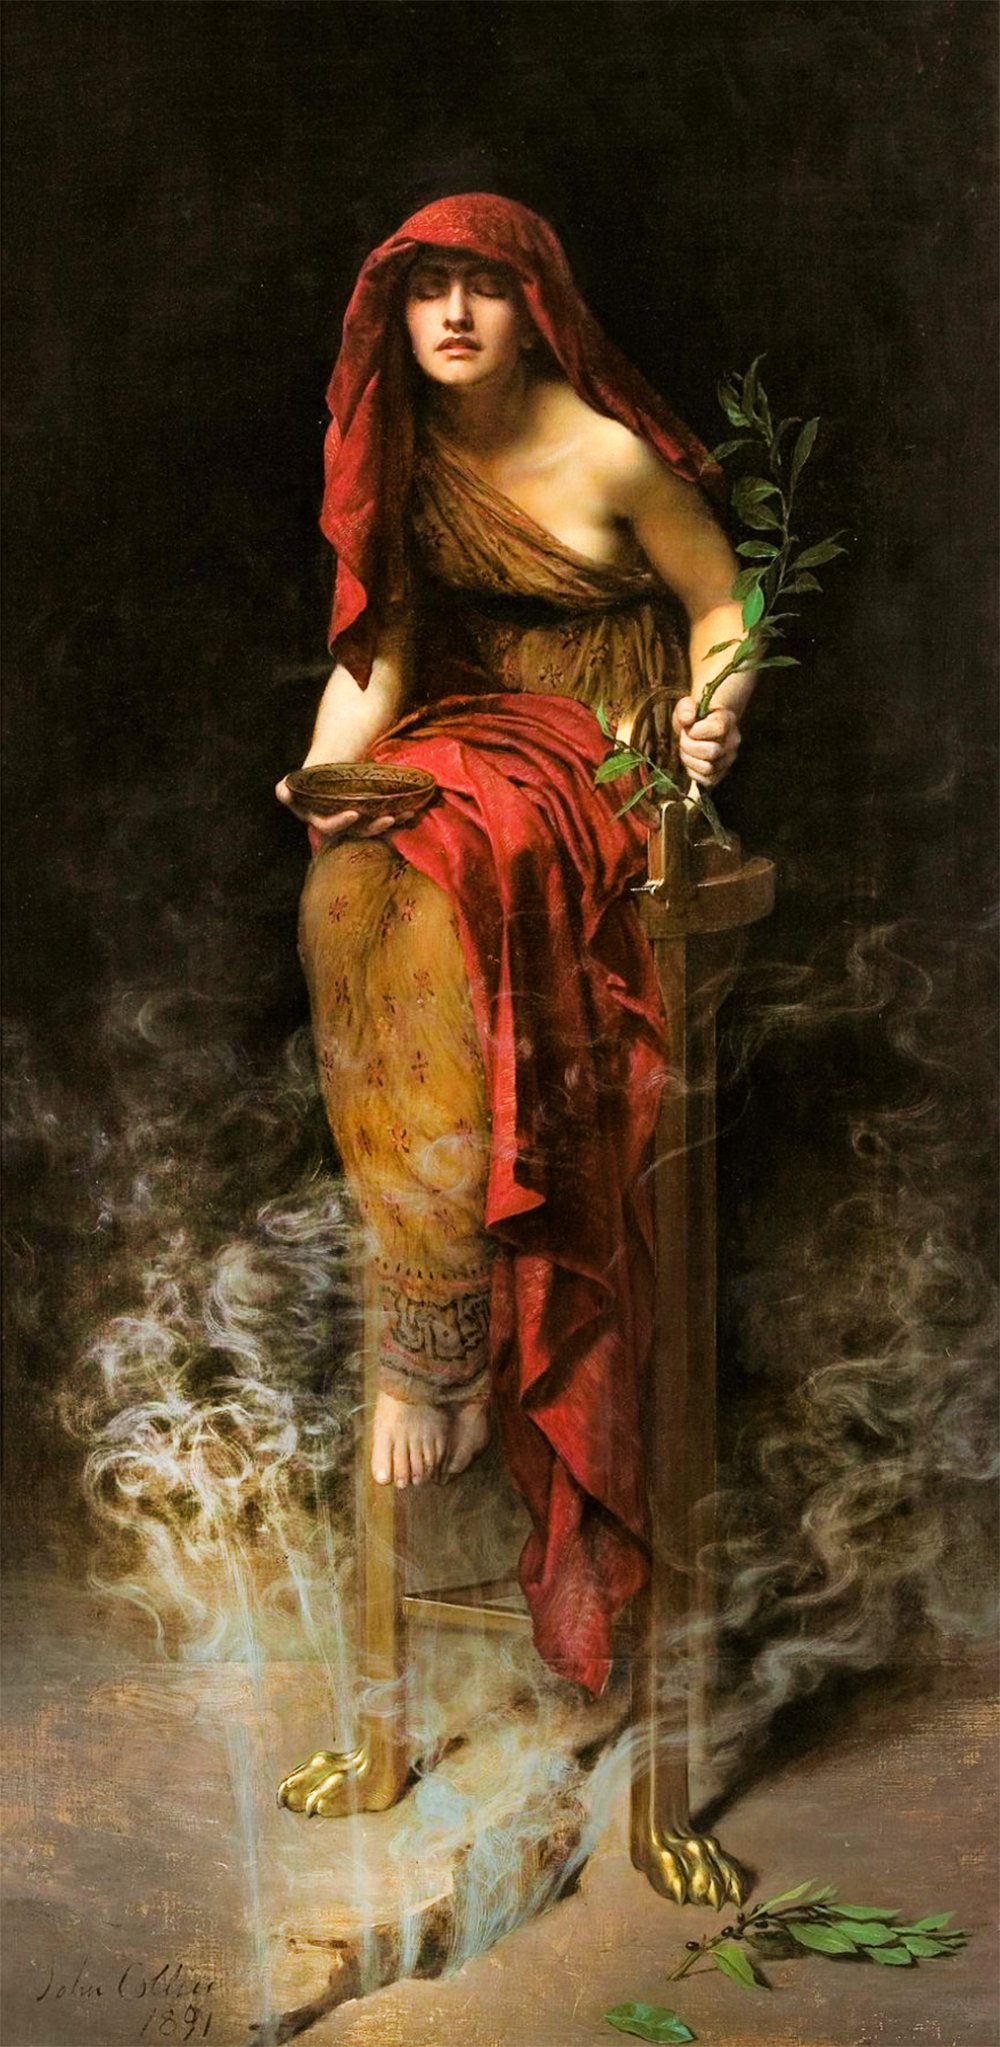 John Collier's 1891 painting 'Priestess of Delphi,' portraying the Pythia in a state of trance, influenced by vapors emanating from the Kerna spring beneath the Temple of Apollo.